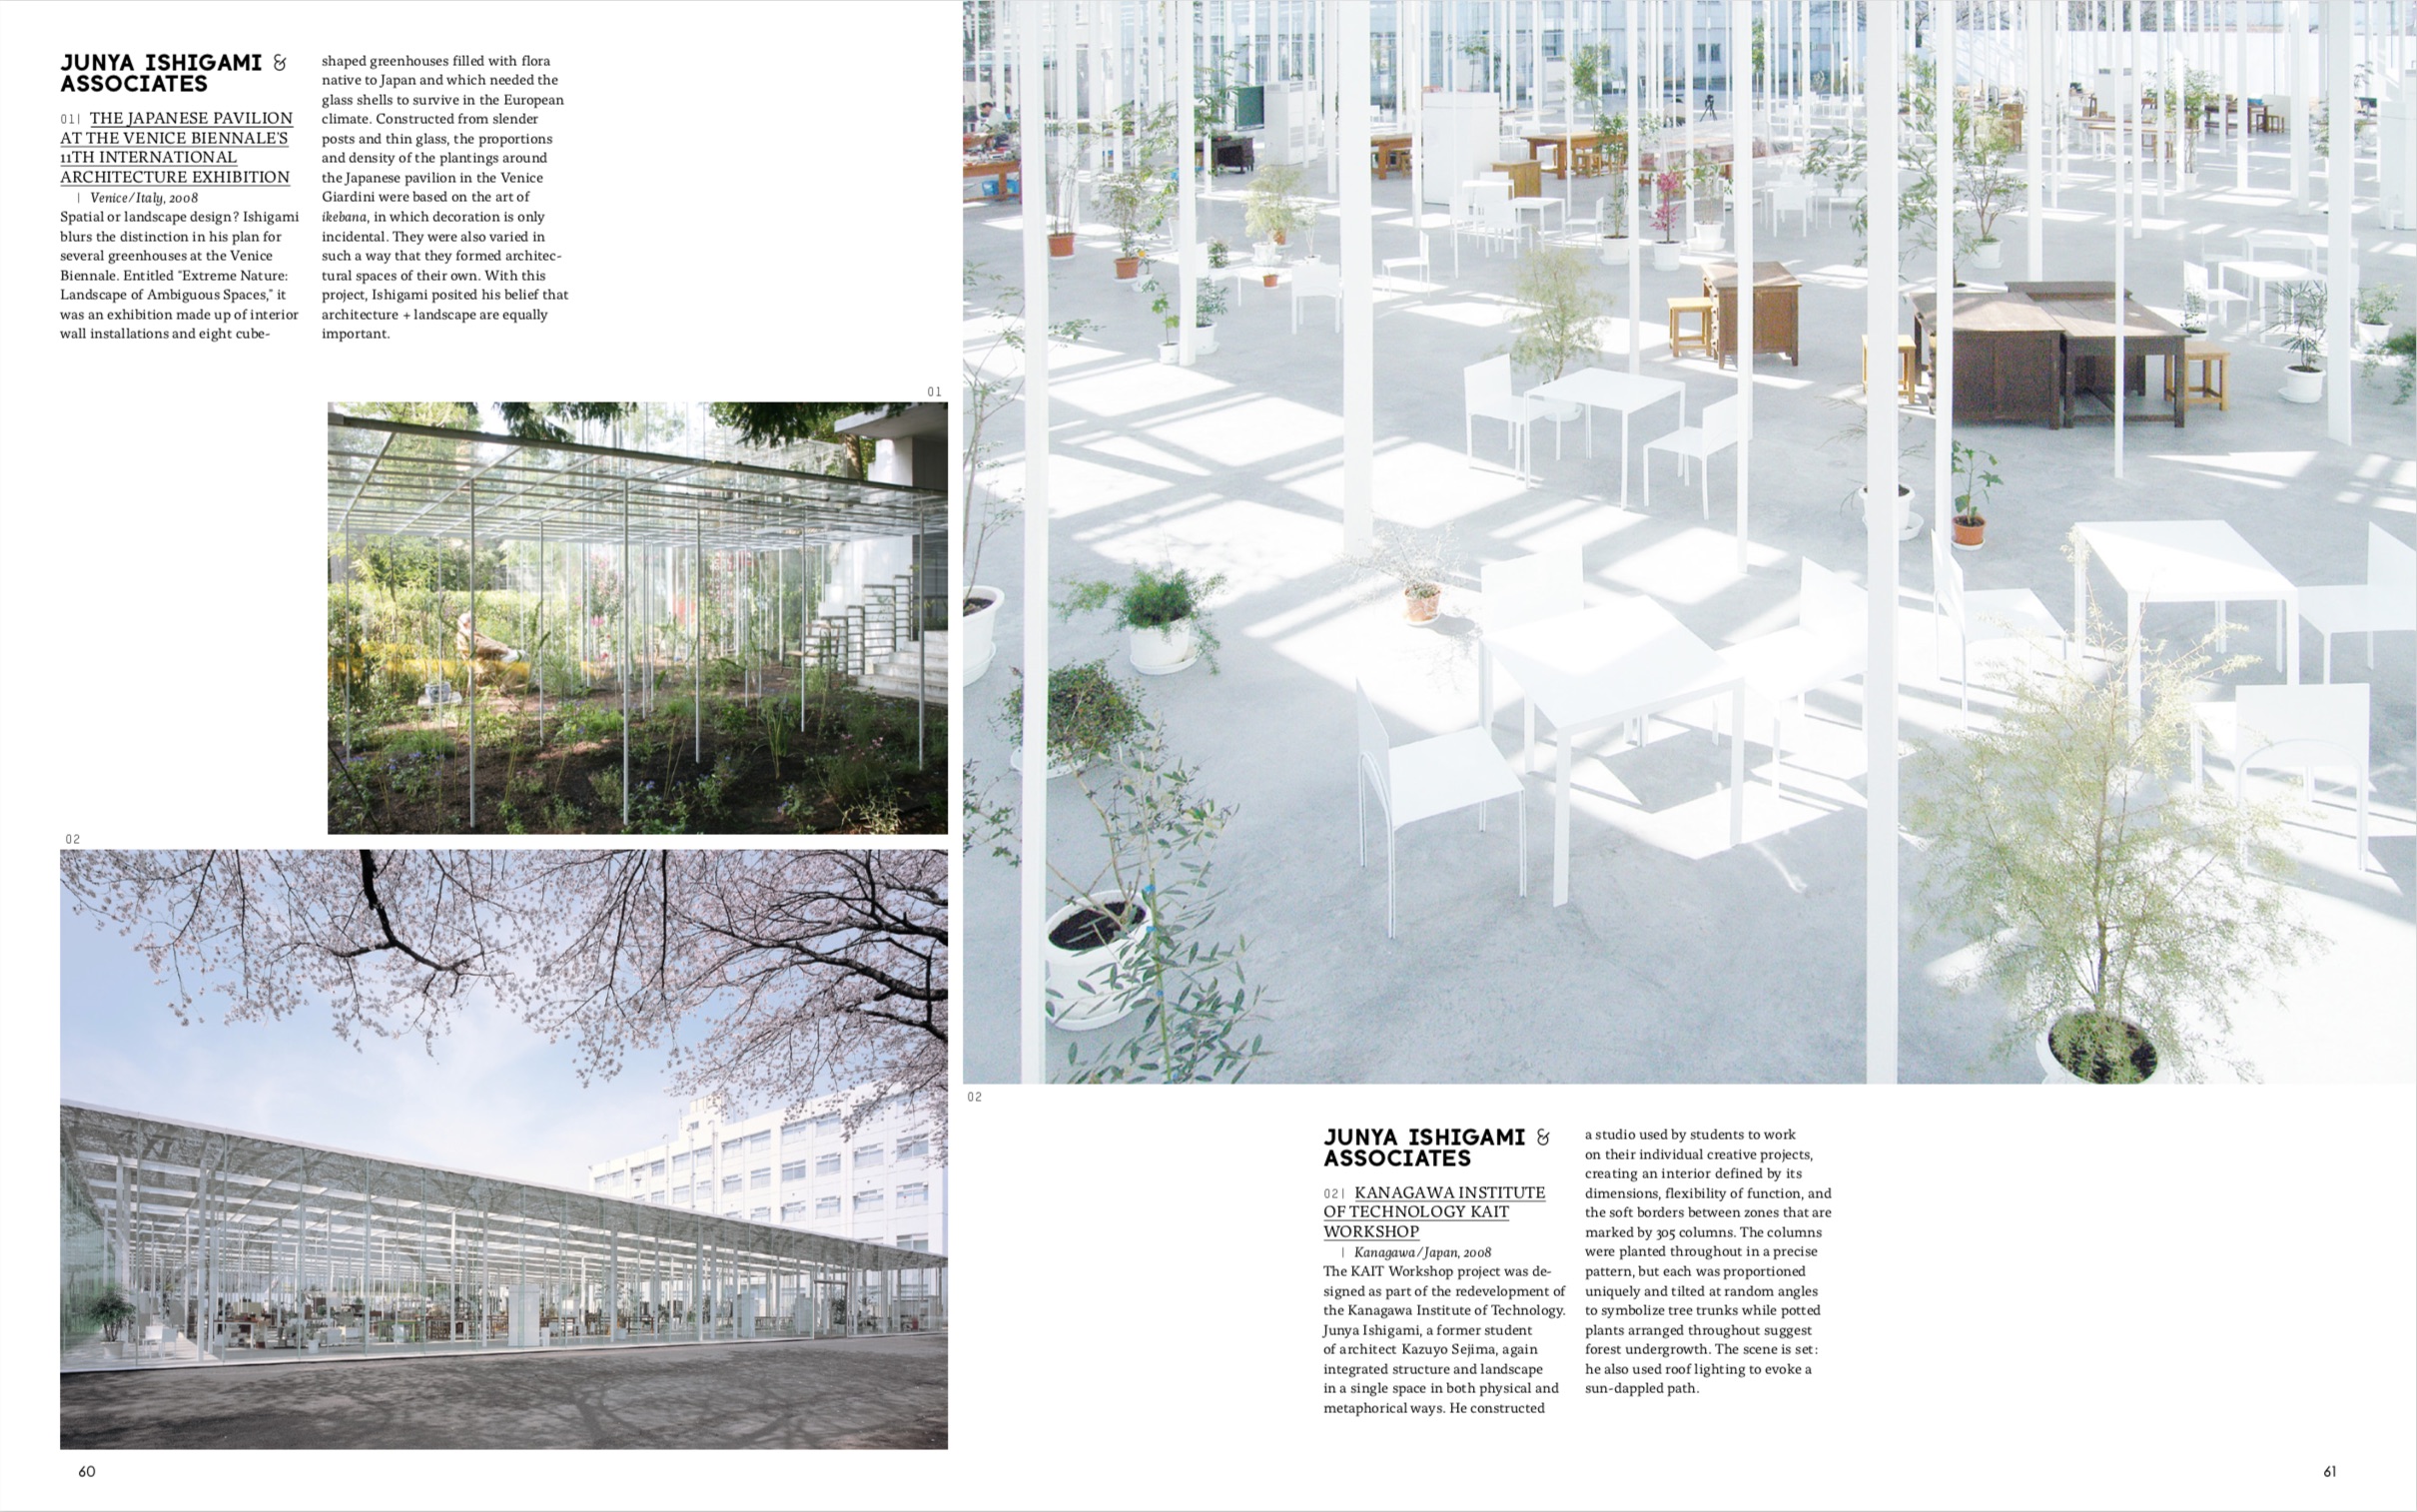 By Robert Klanten, K.Bolhofer, B.Meyer from Sublime: New Design and Architecture from Japan copyright Gestalten 2011